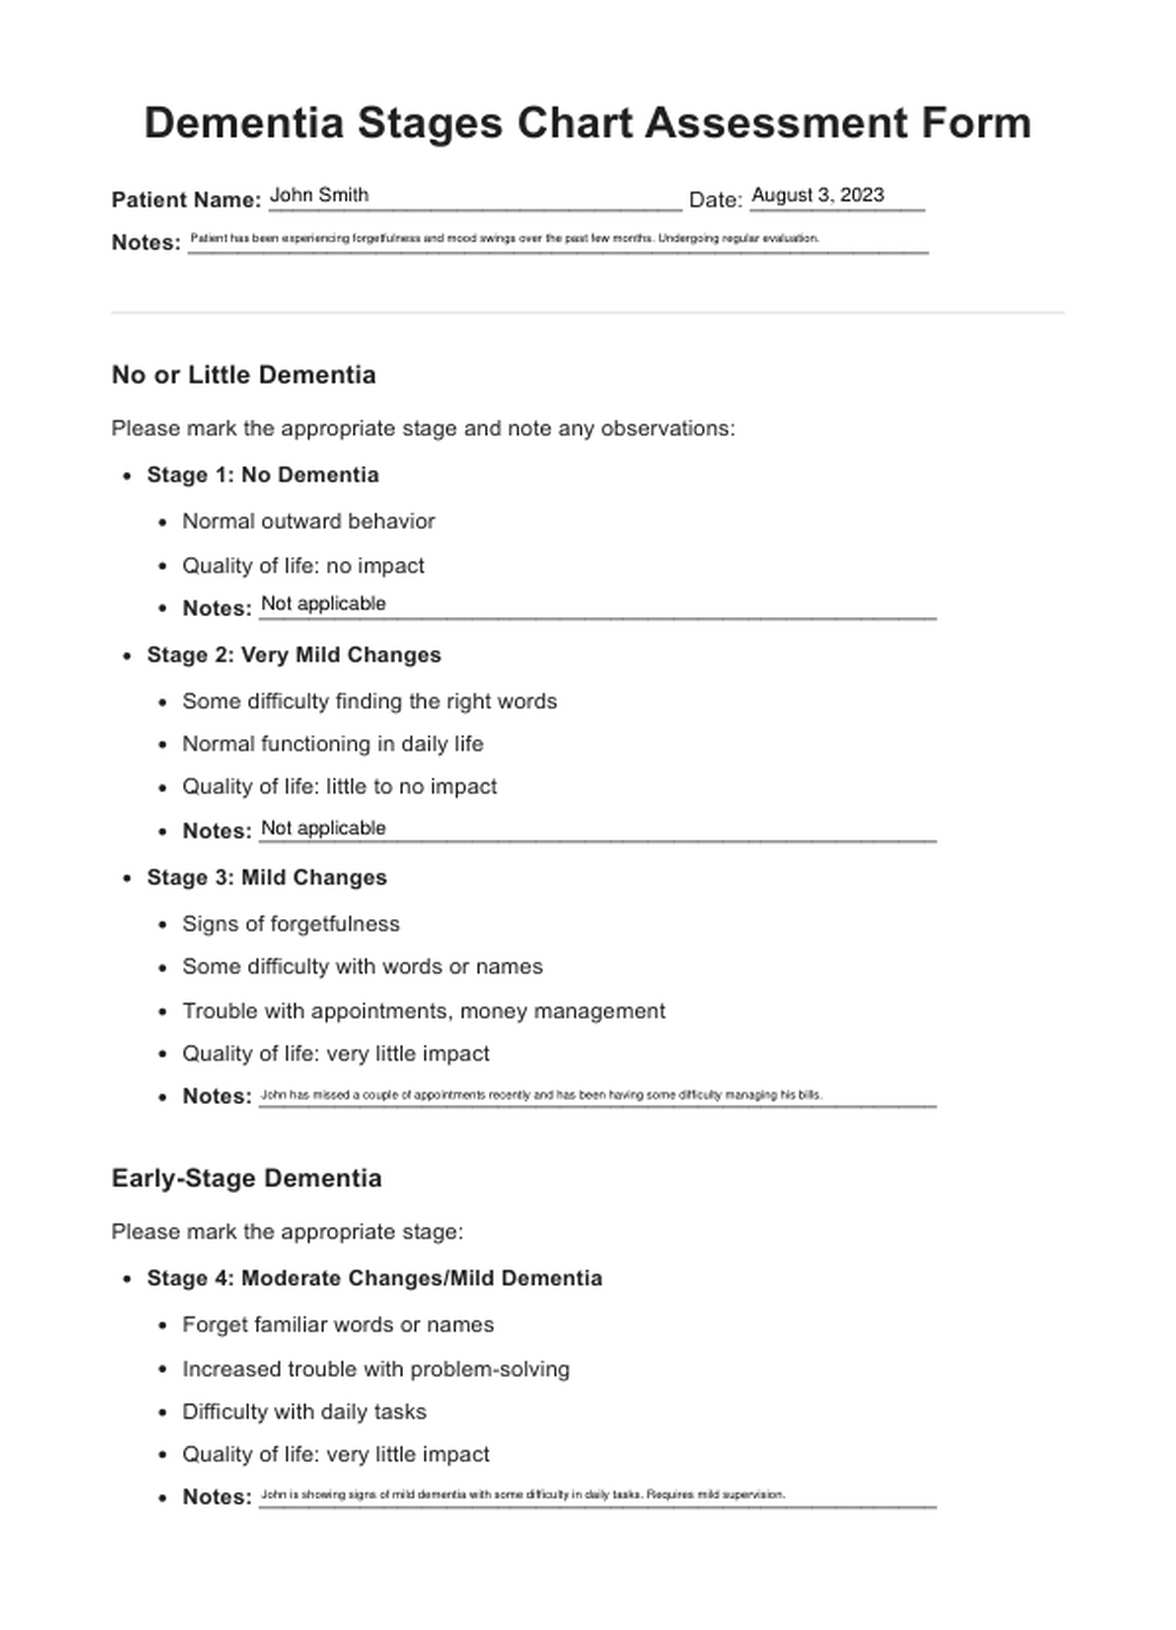 Dementia Stages Chart PDF Example